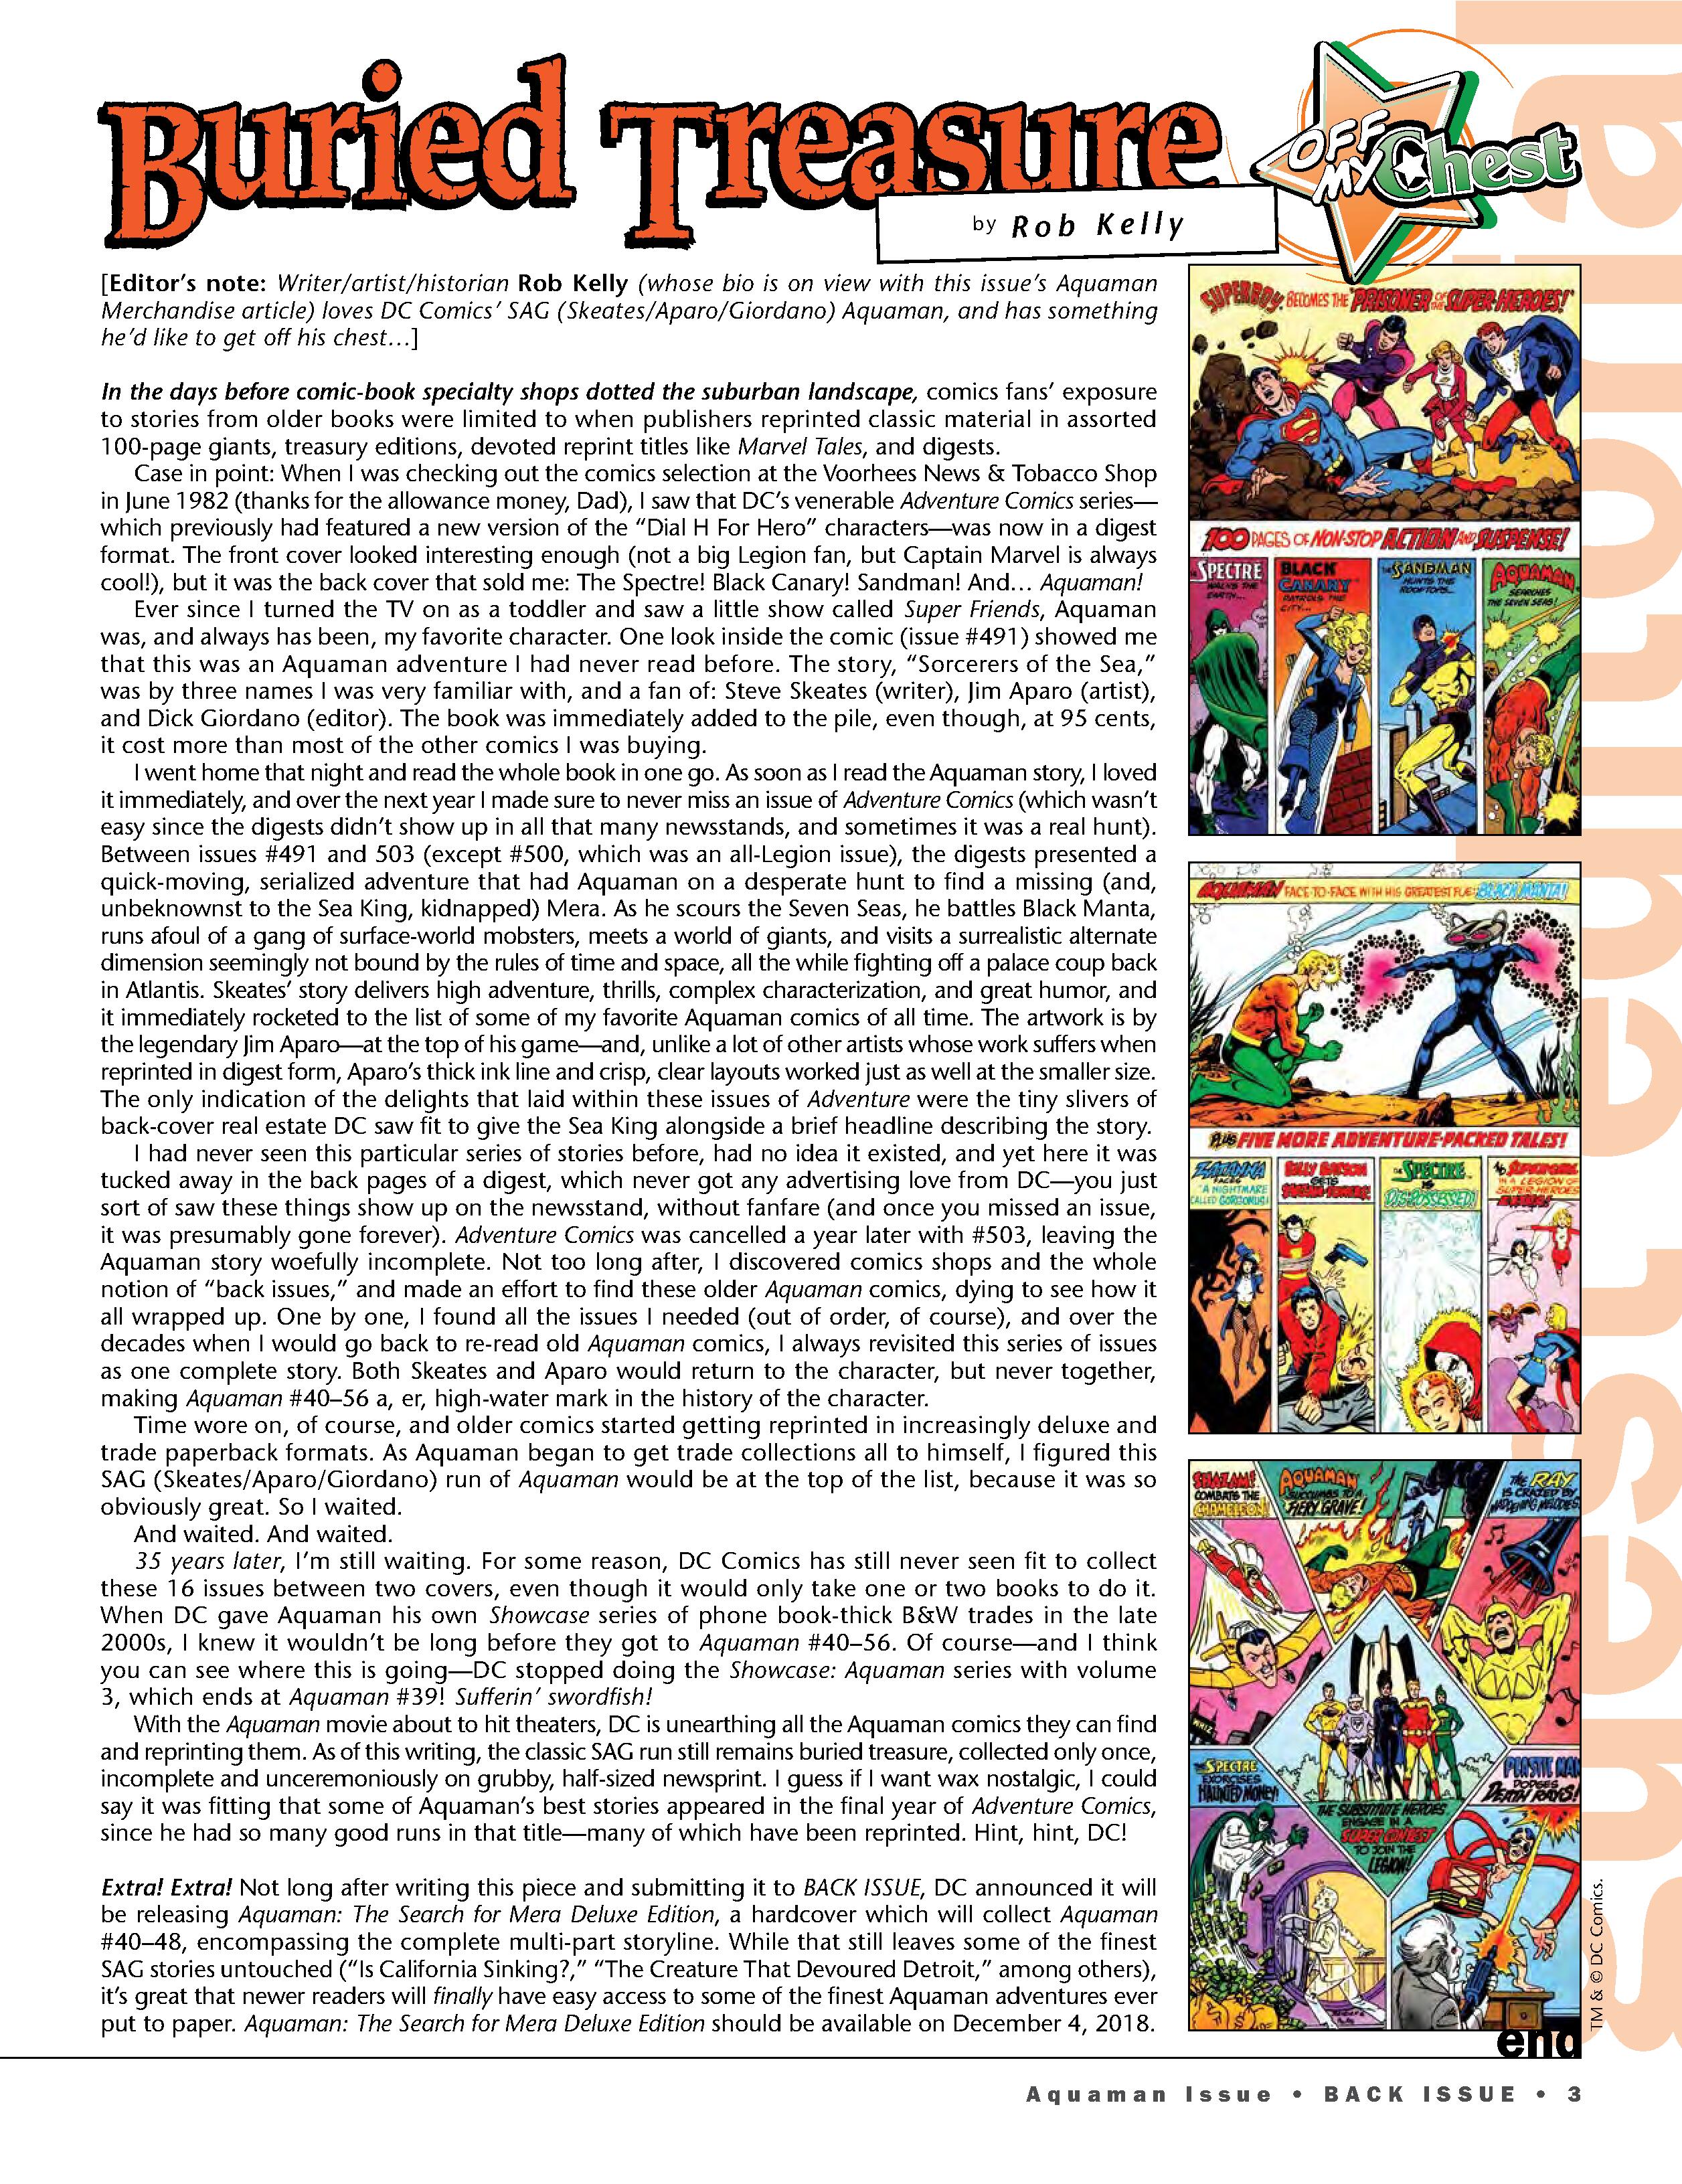 Read online Back Issue comic -  Issue #108 - 5